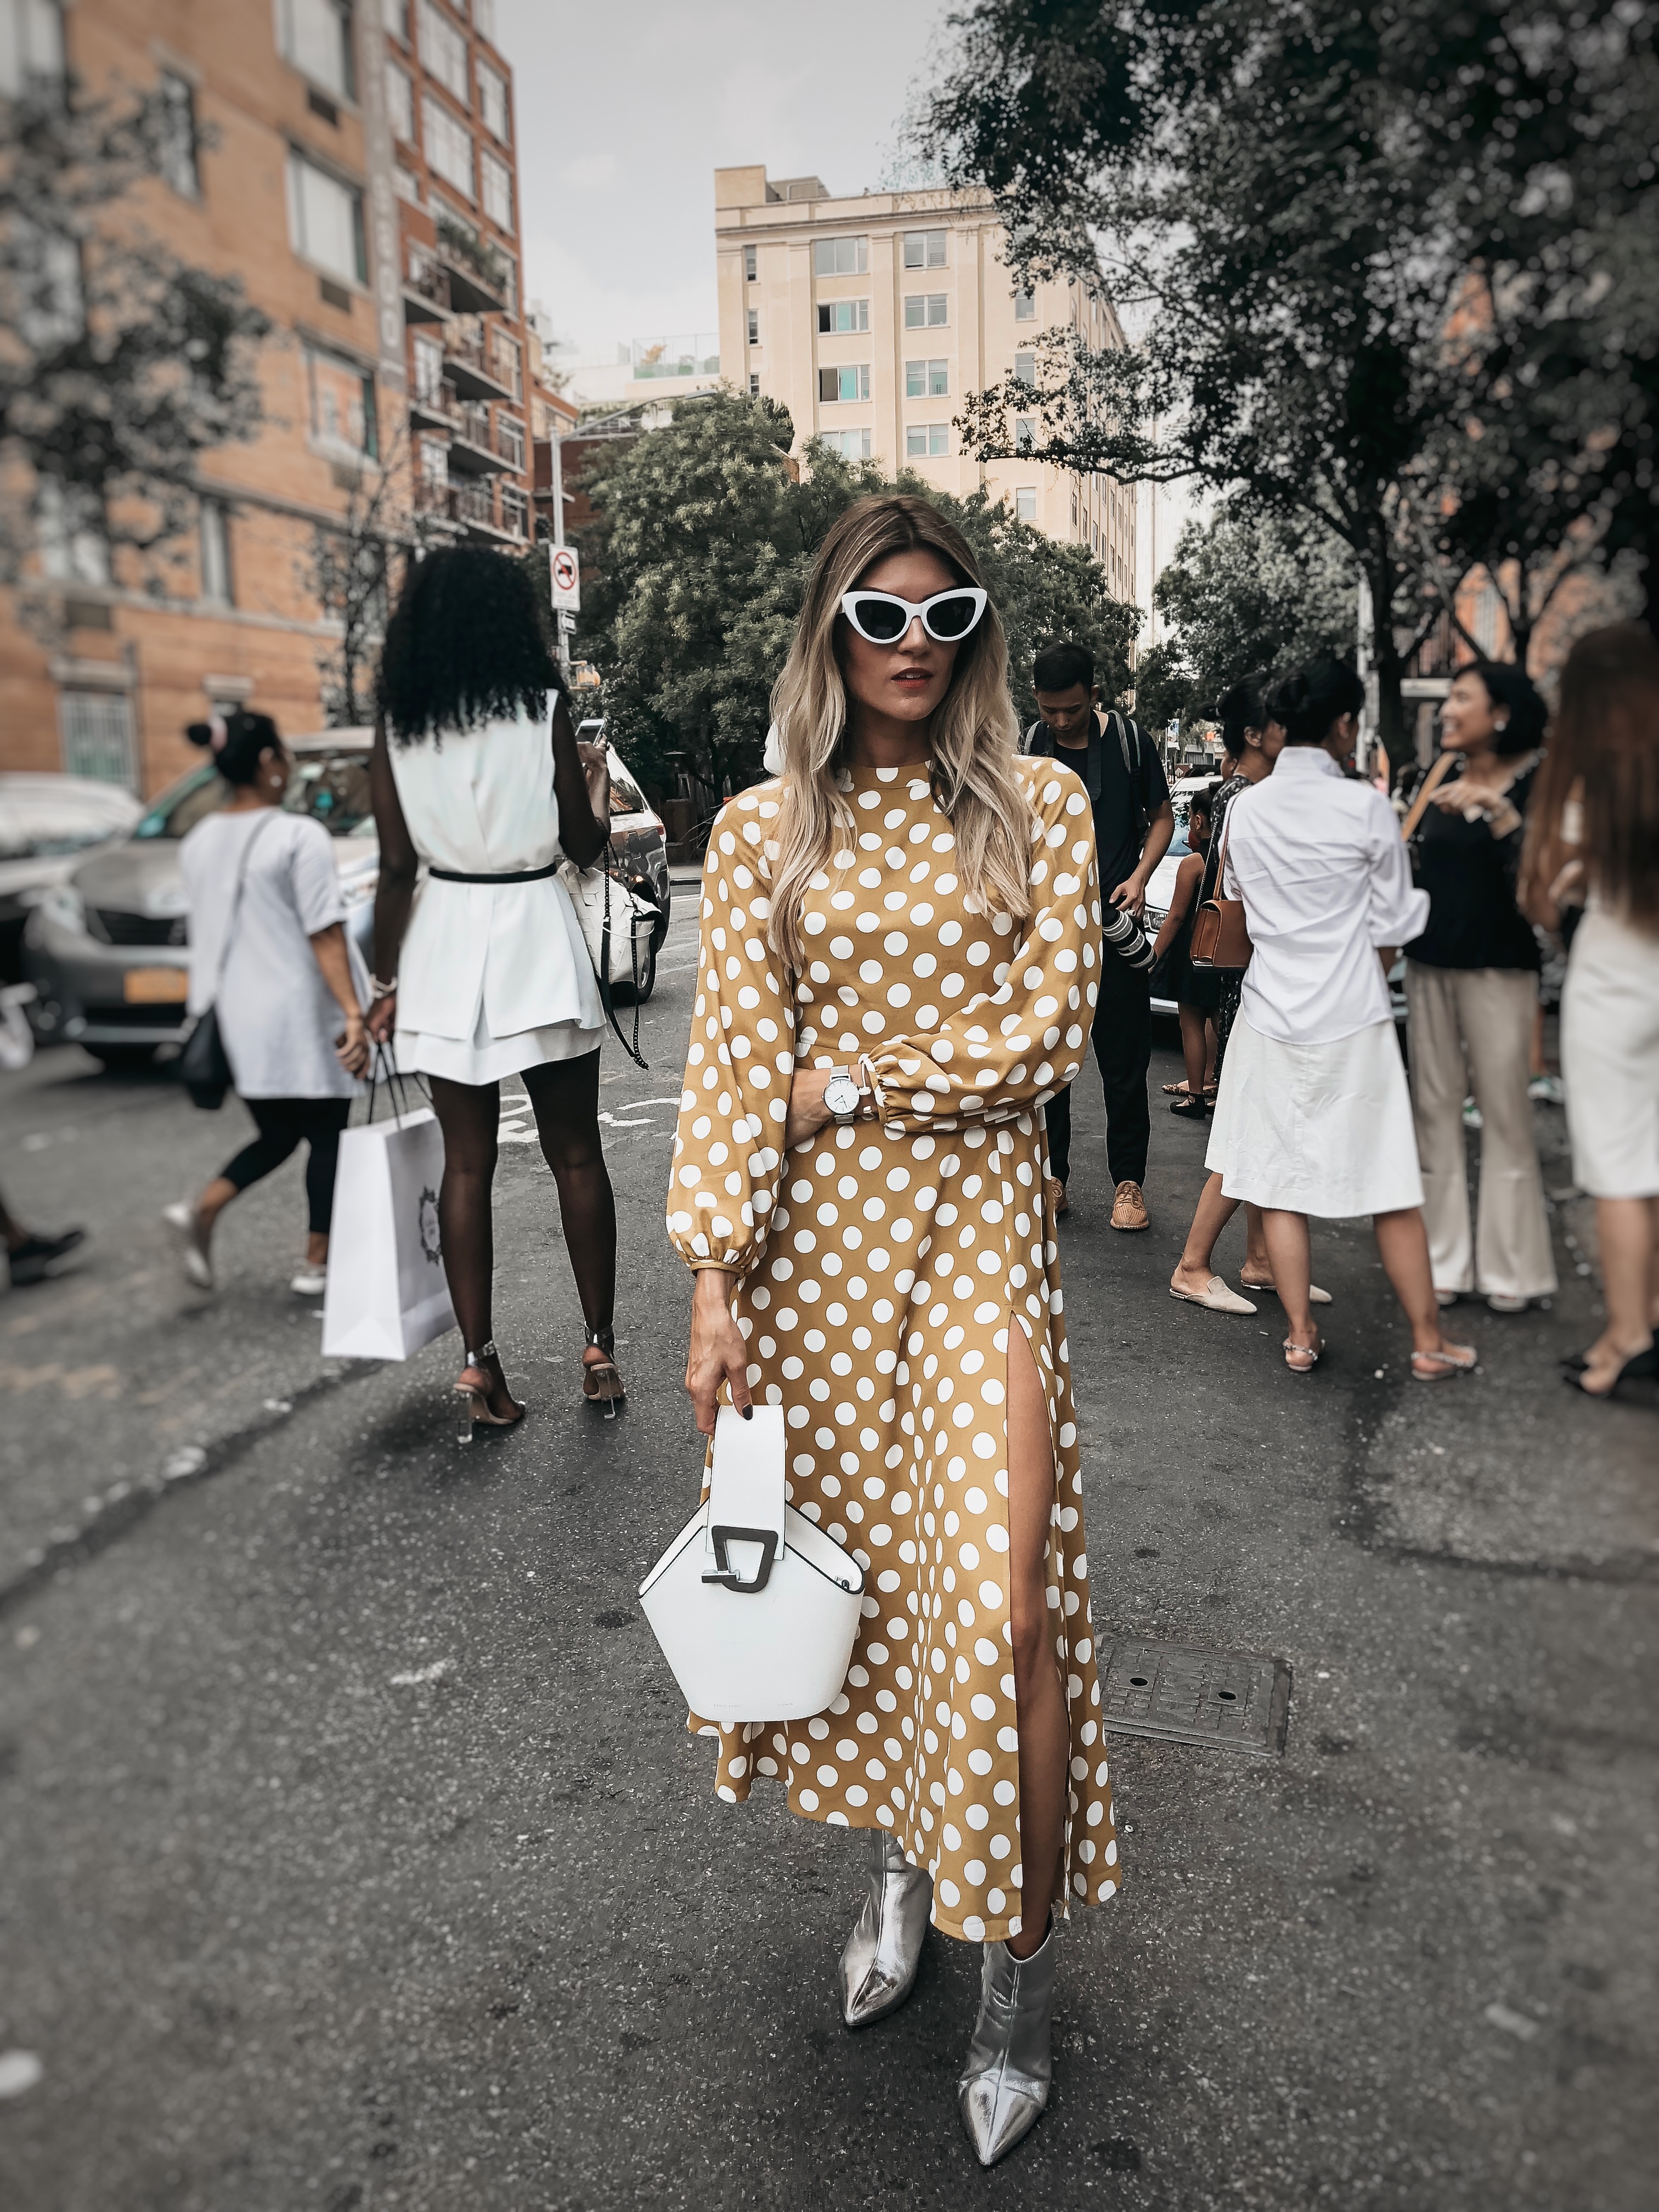 The Grey Edit-NYFW Daily Outfits-Polka Dot Dress-White Accessories